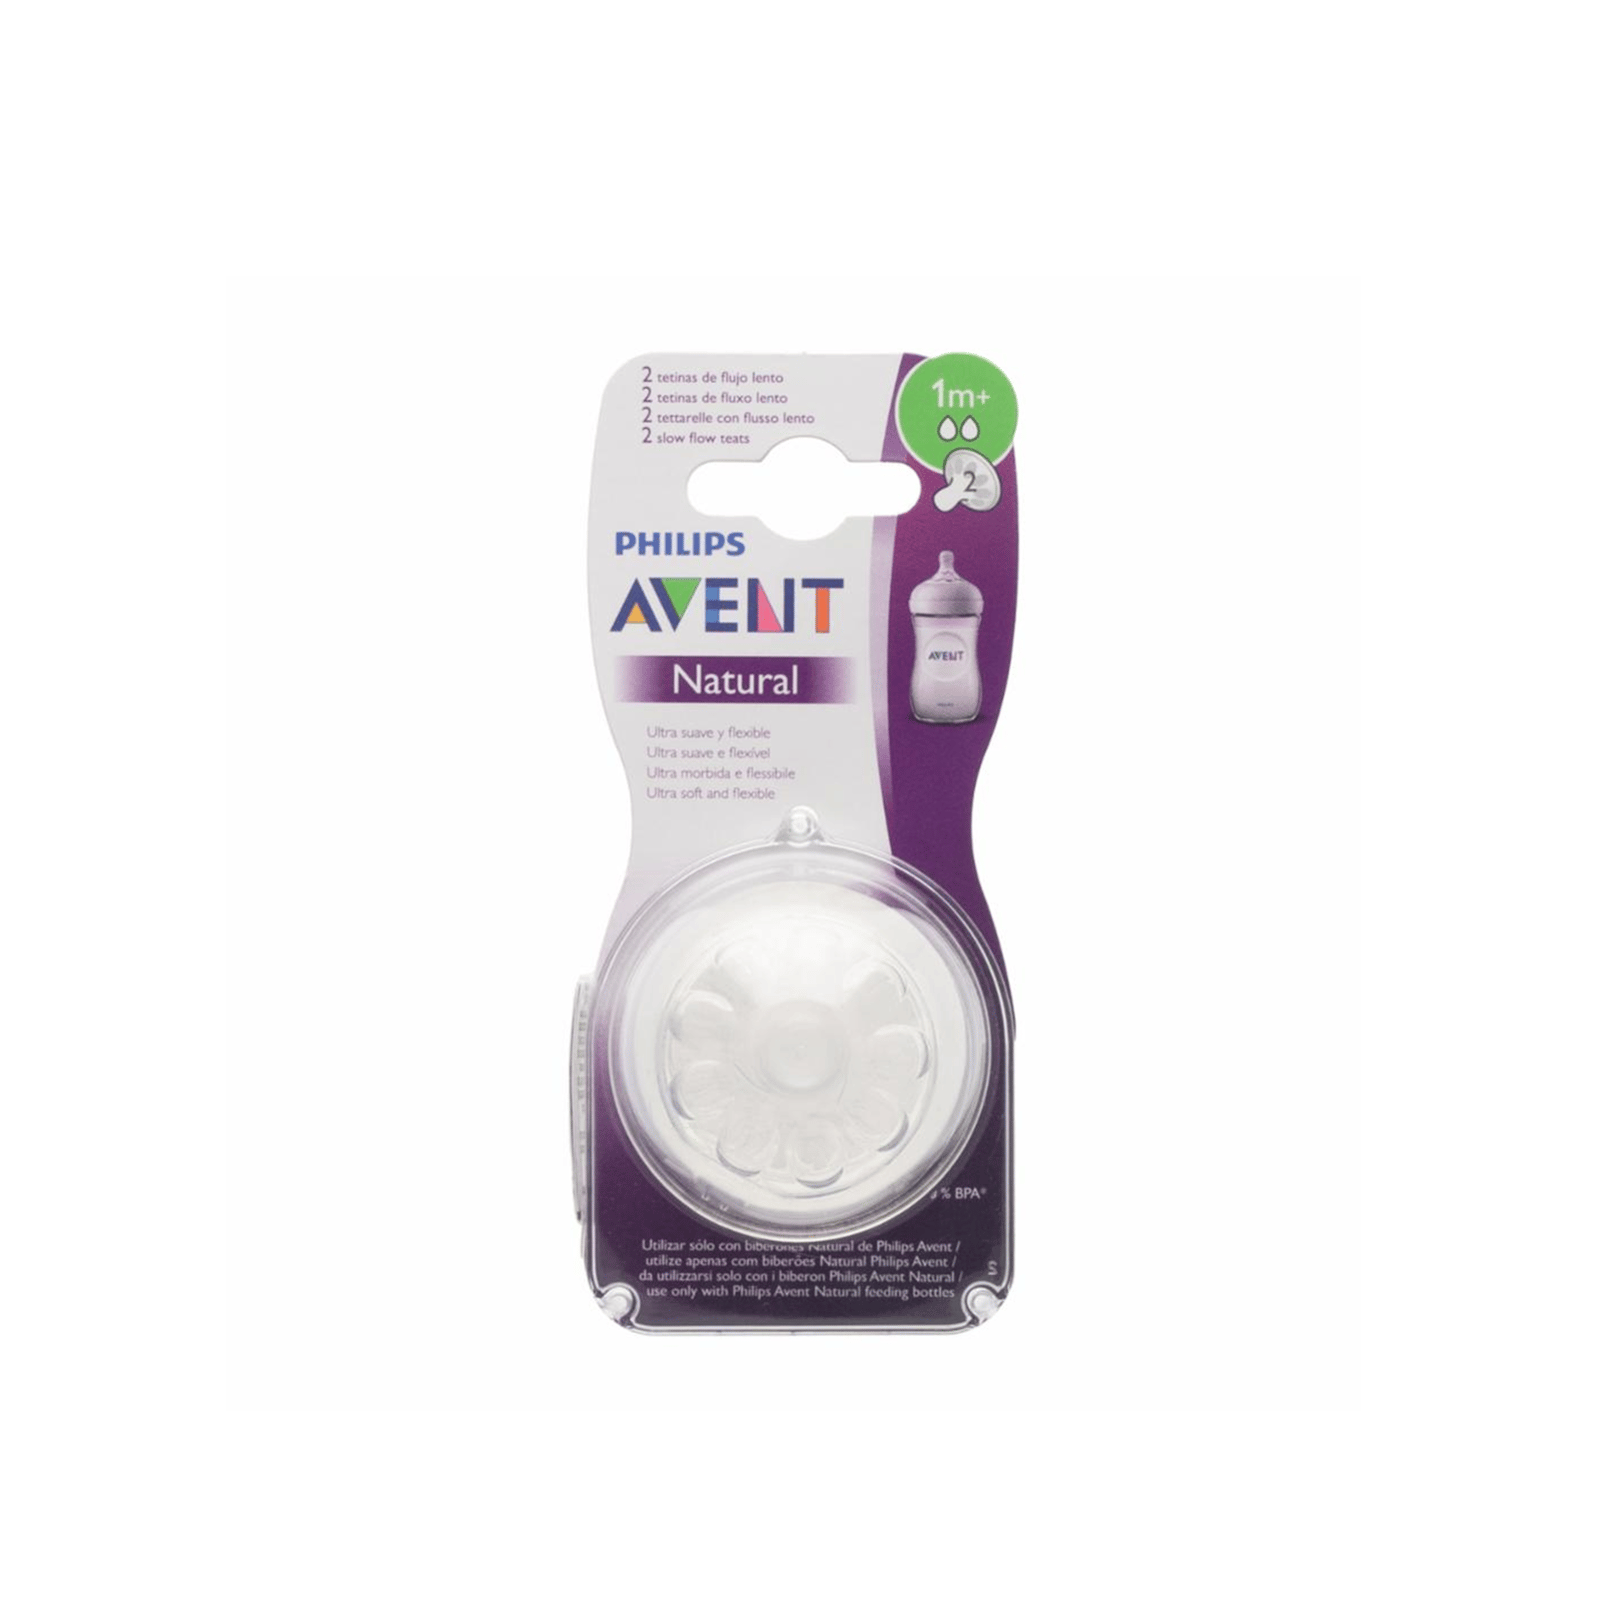 Buy Philips Avent Natural Baby Bottle Nipple Flow 2 1m+ x2 · USA (Spanish)